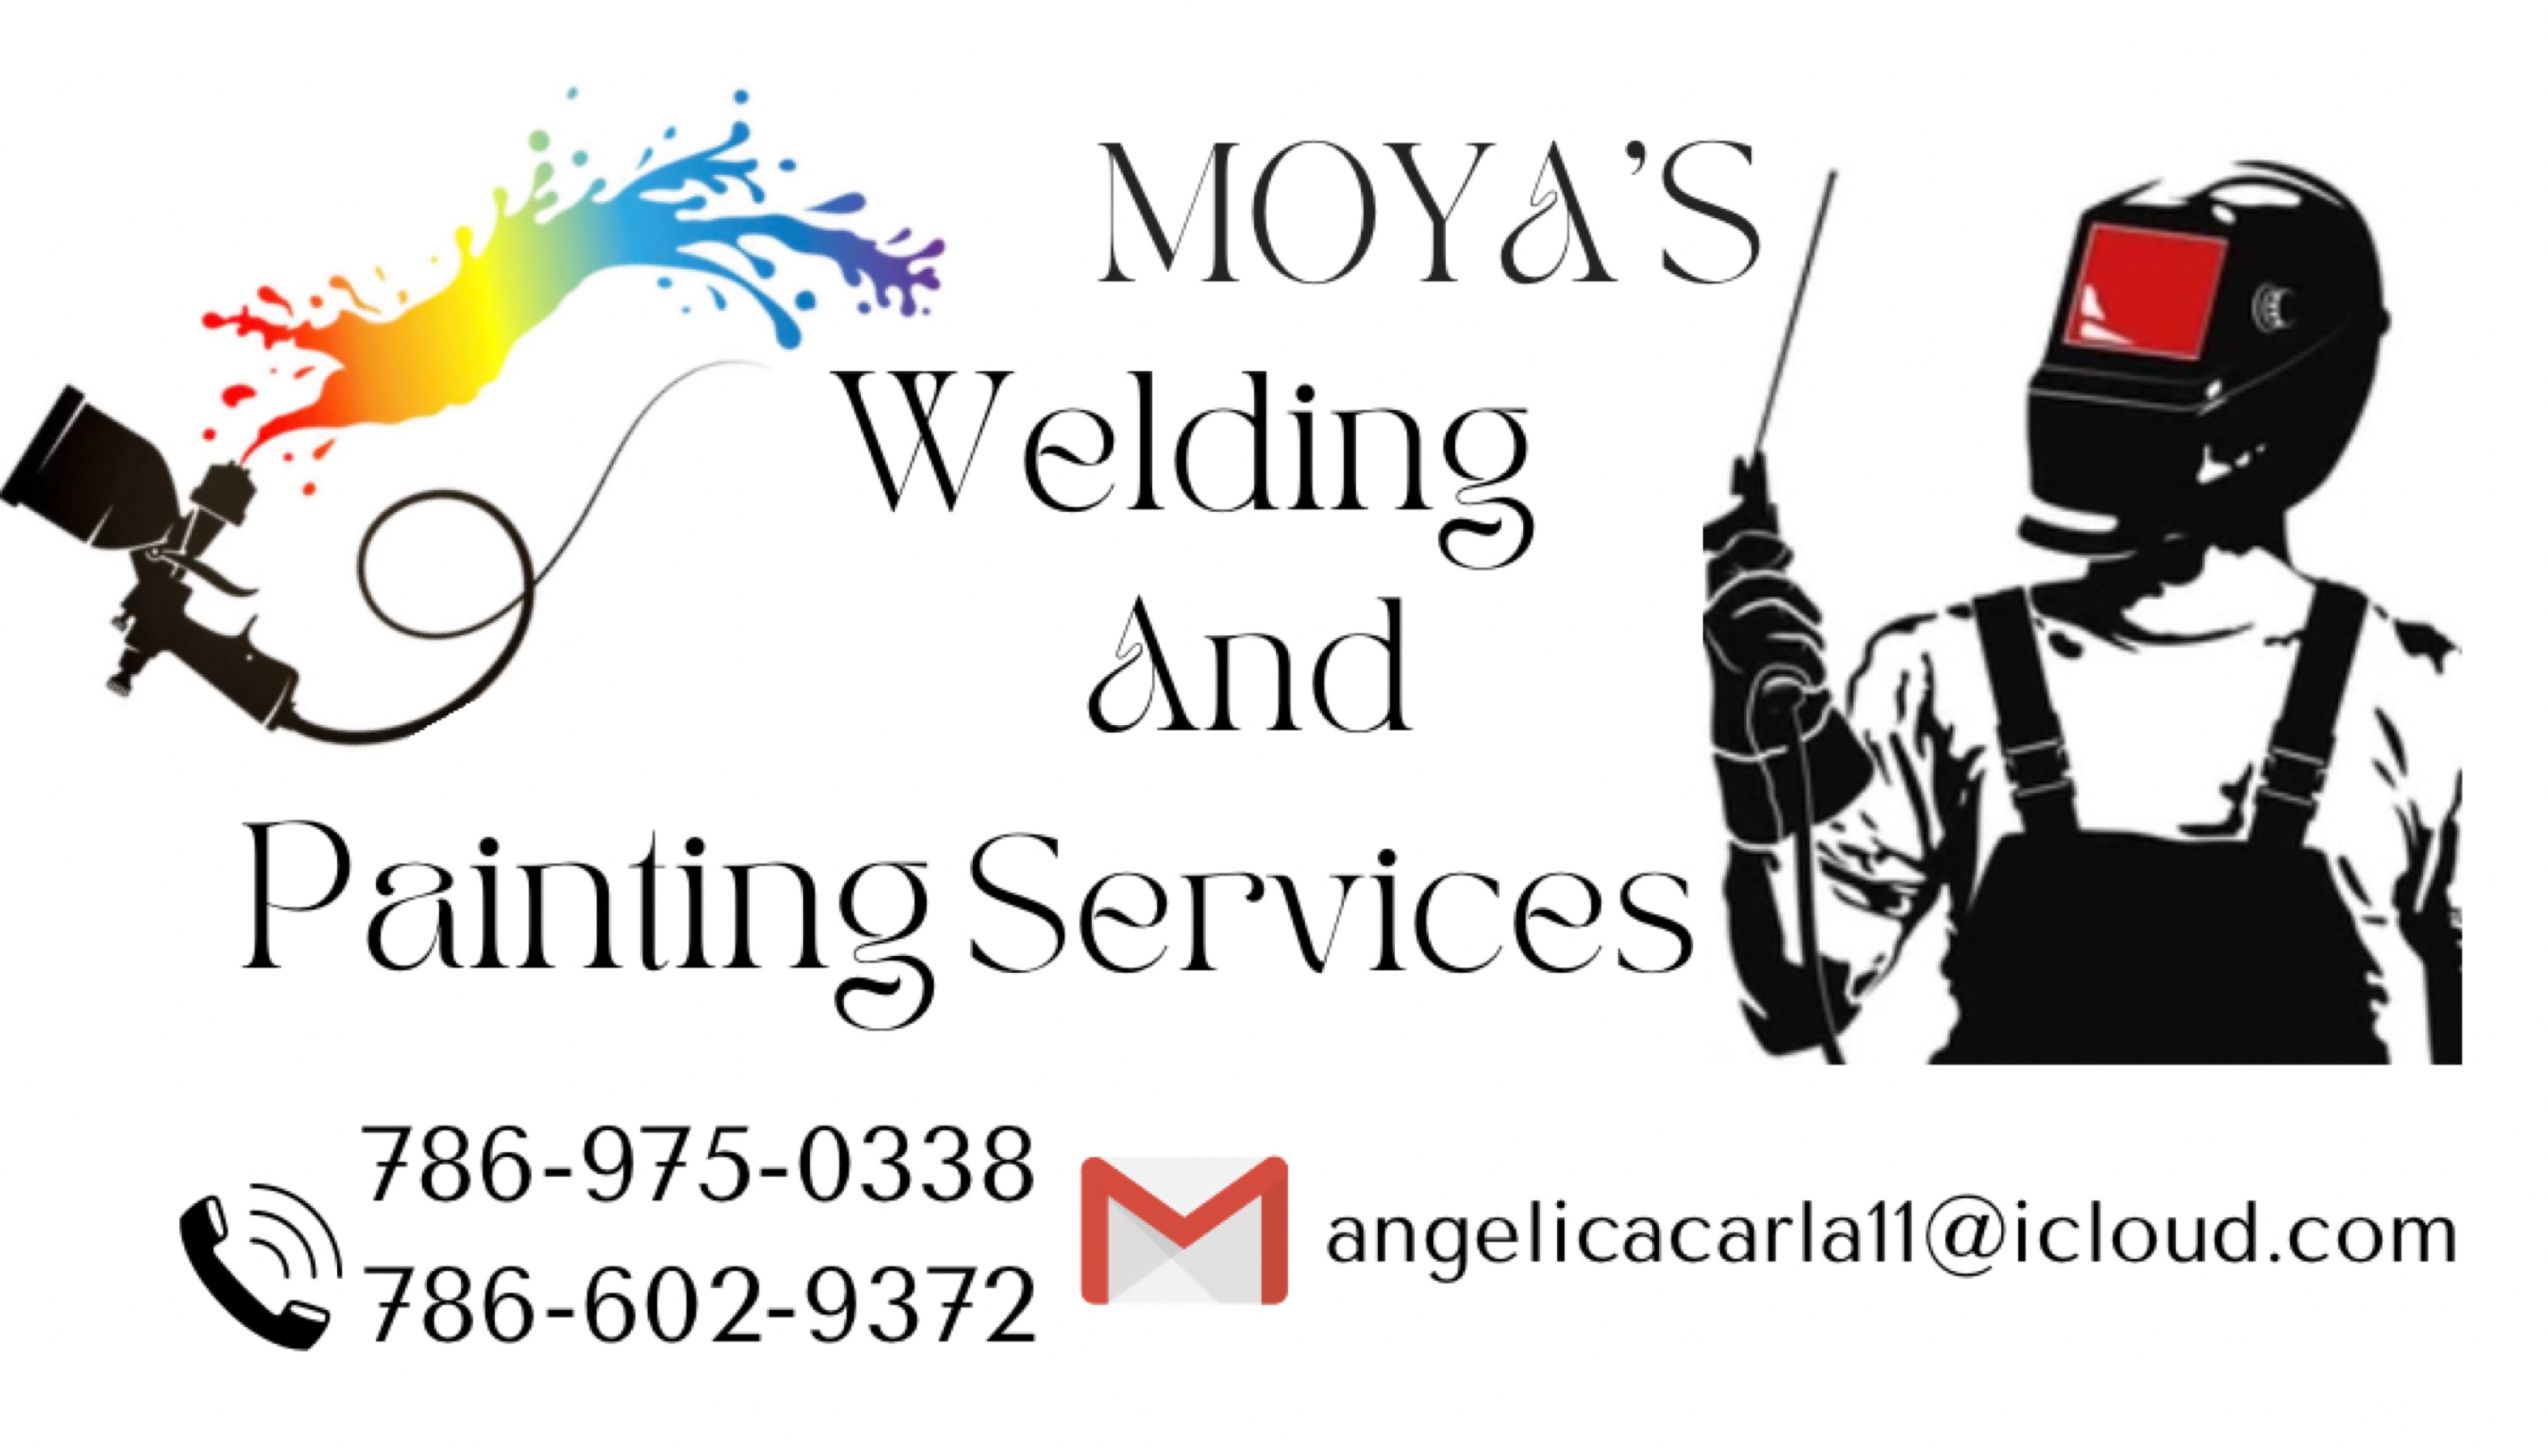 Moya's Welding and Painting Services Logo